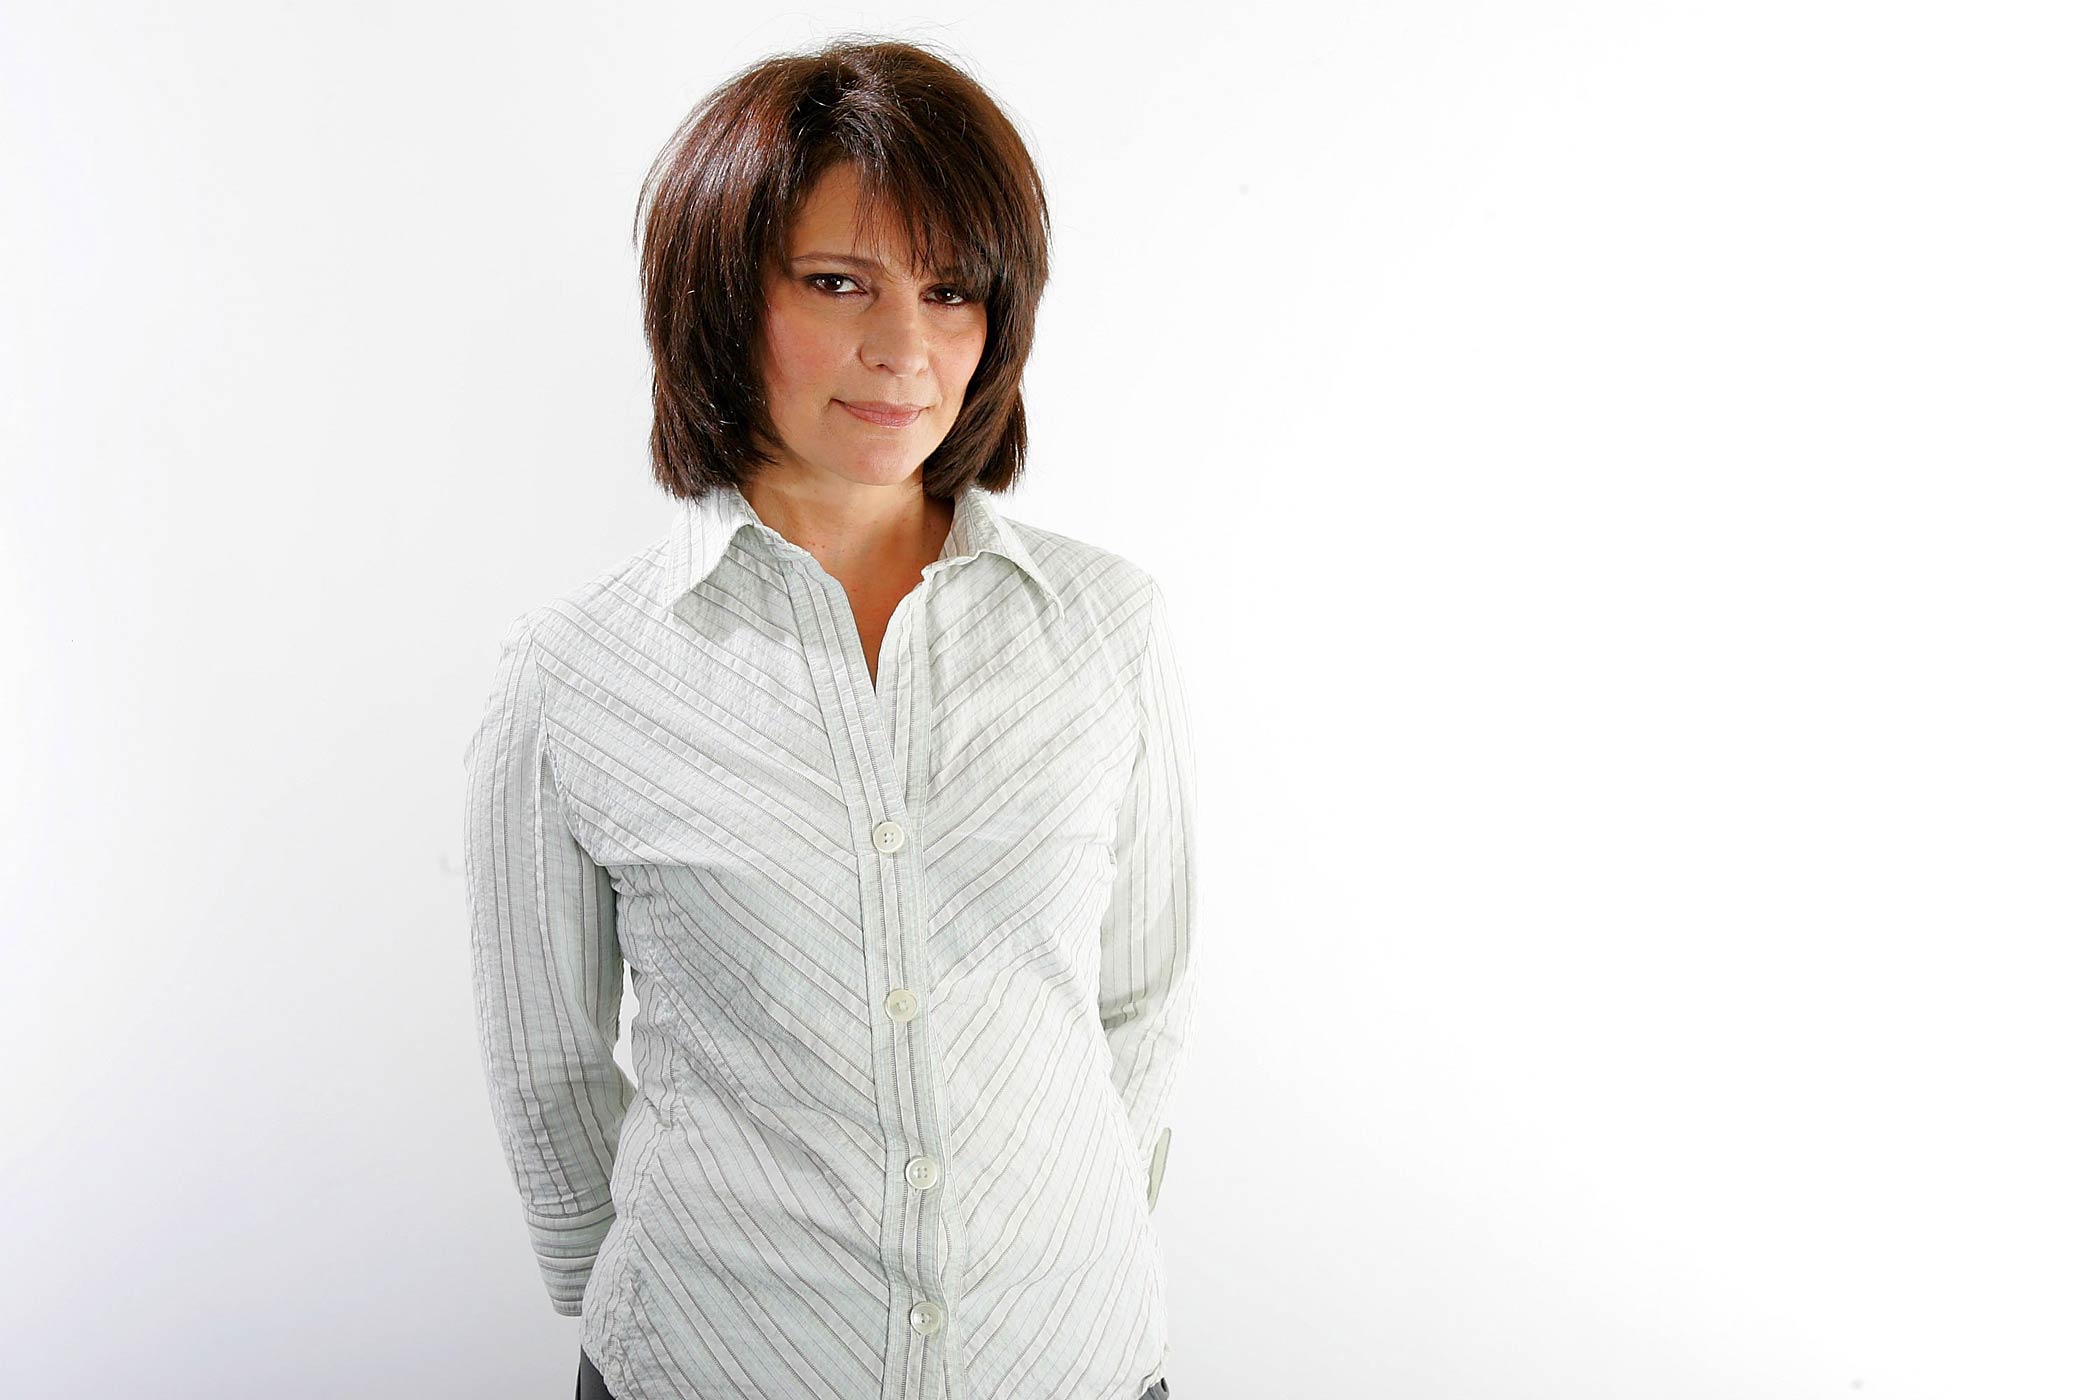 Alberta Watson poses for a portrait in the Chanel Celebrity Suite at the Four Season hotel during the Toronto International Film Festival on Sept. 7, 2006 in Toronto, Canada. (Carlo Allegri—Getty Images)